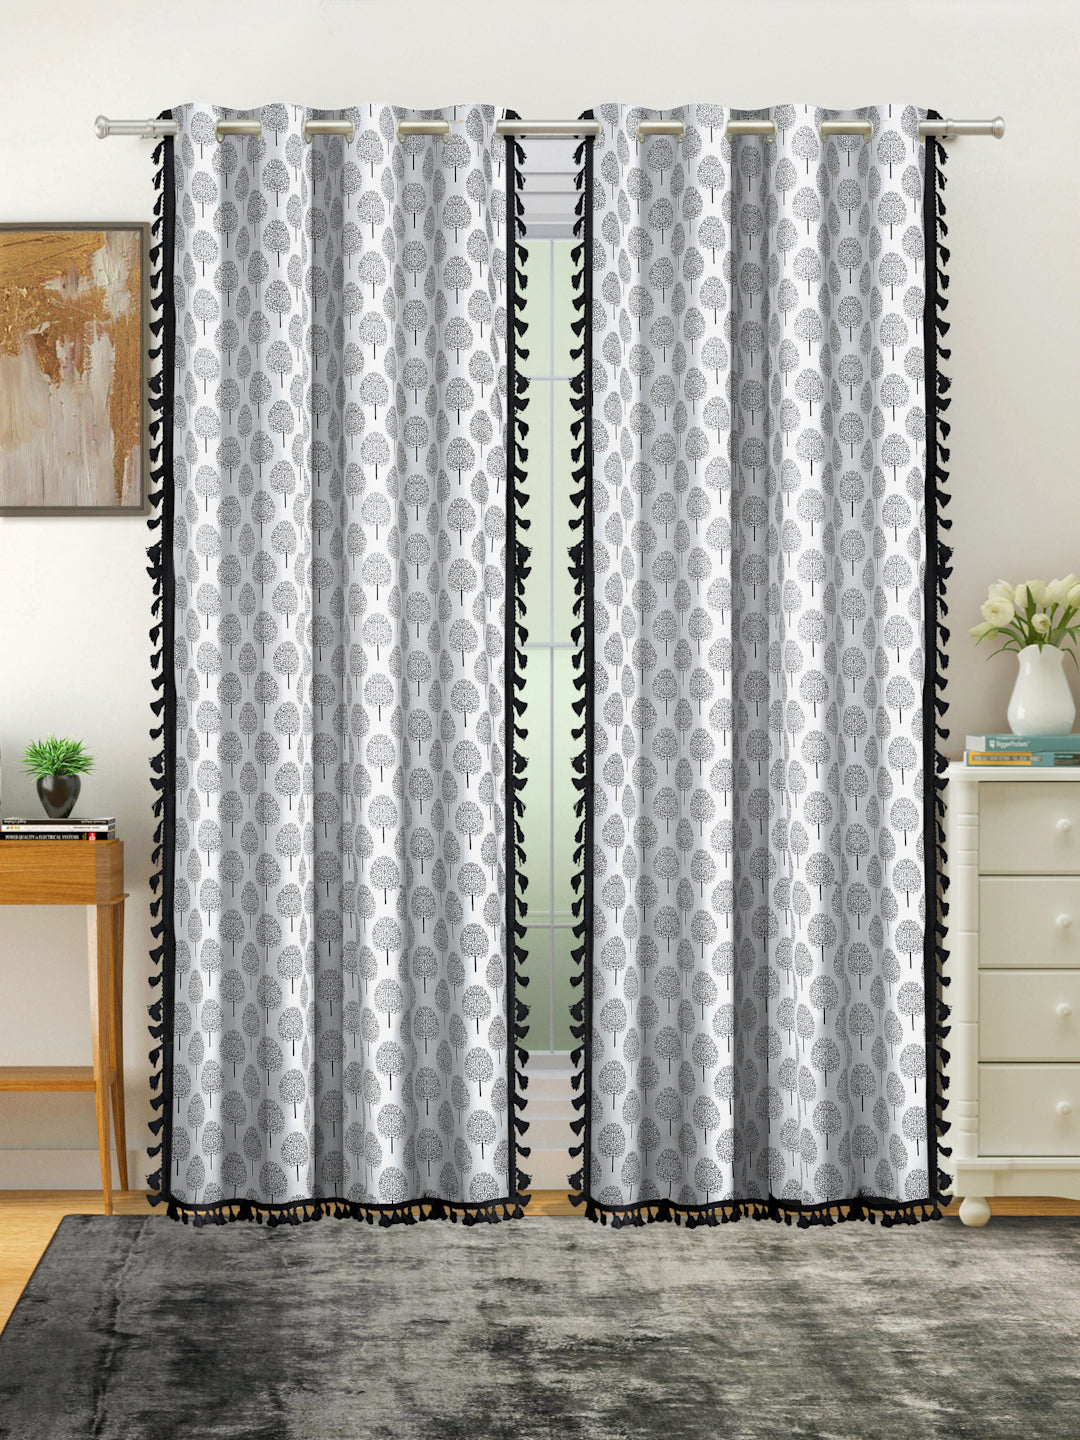 Cotton Printed Boho Light Filtering Long Door Curtain with Lace- Black and White (Pack of 2)